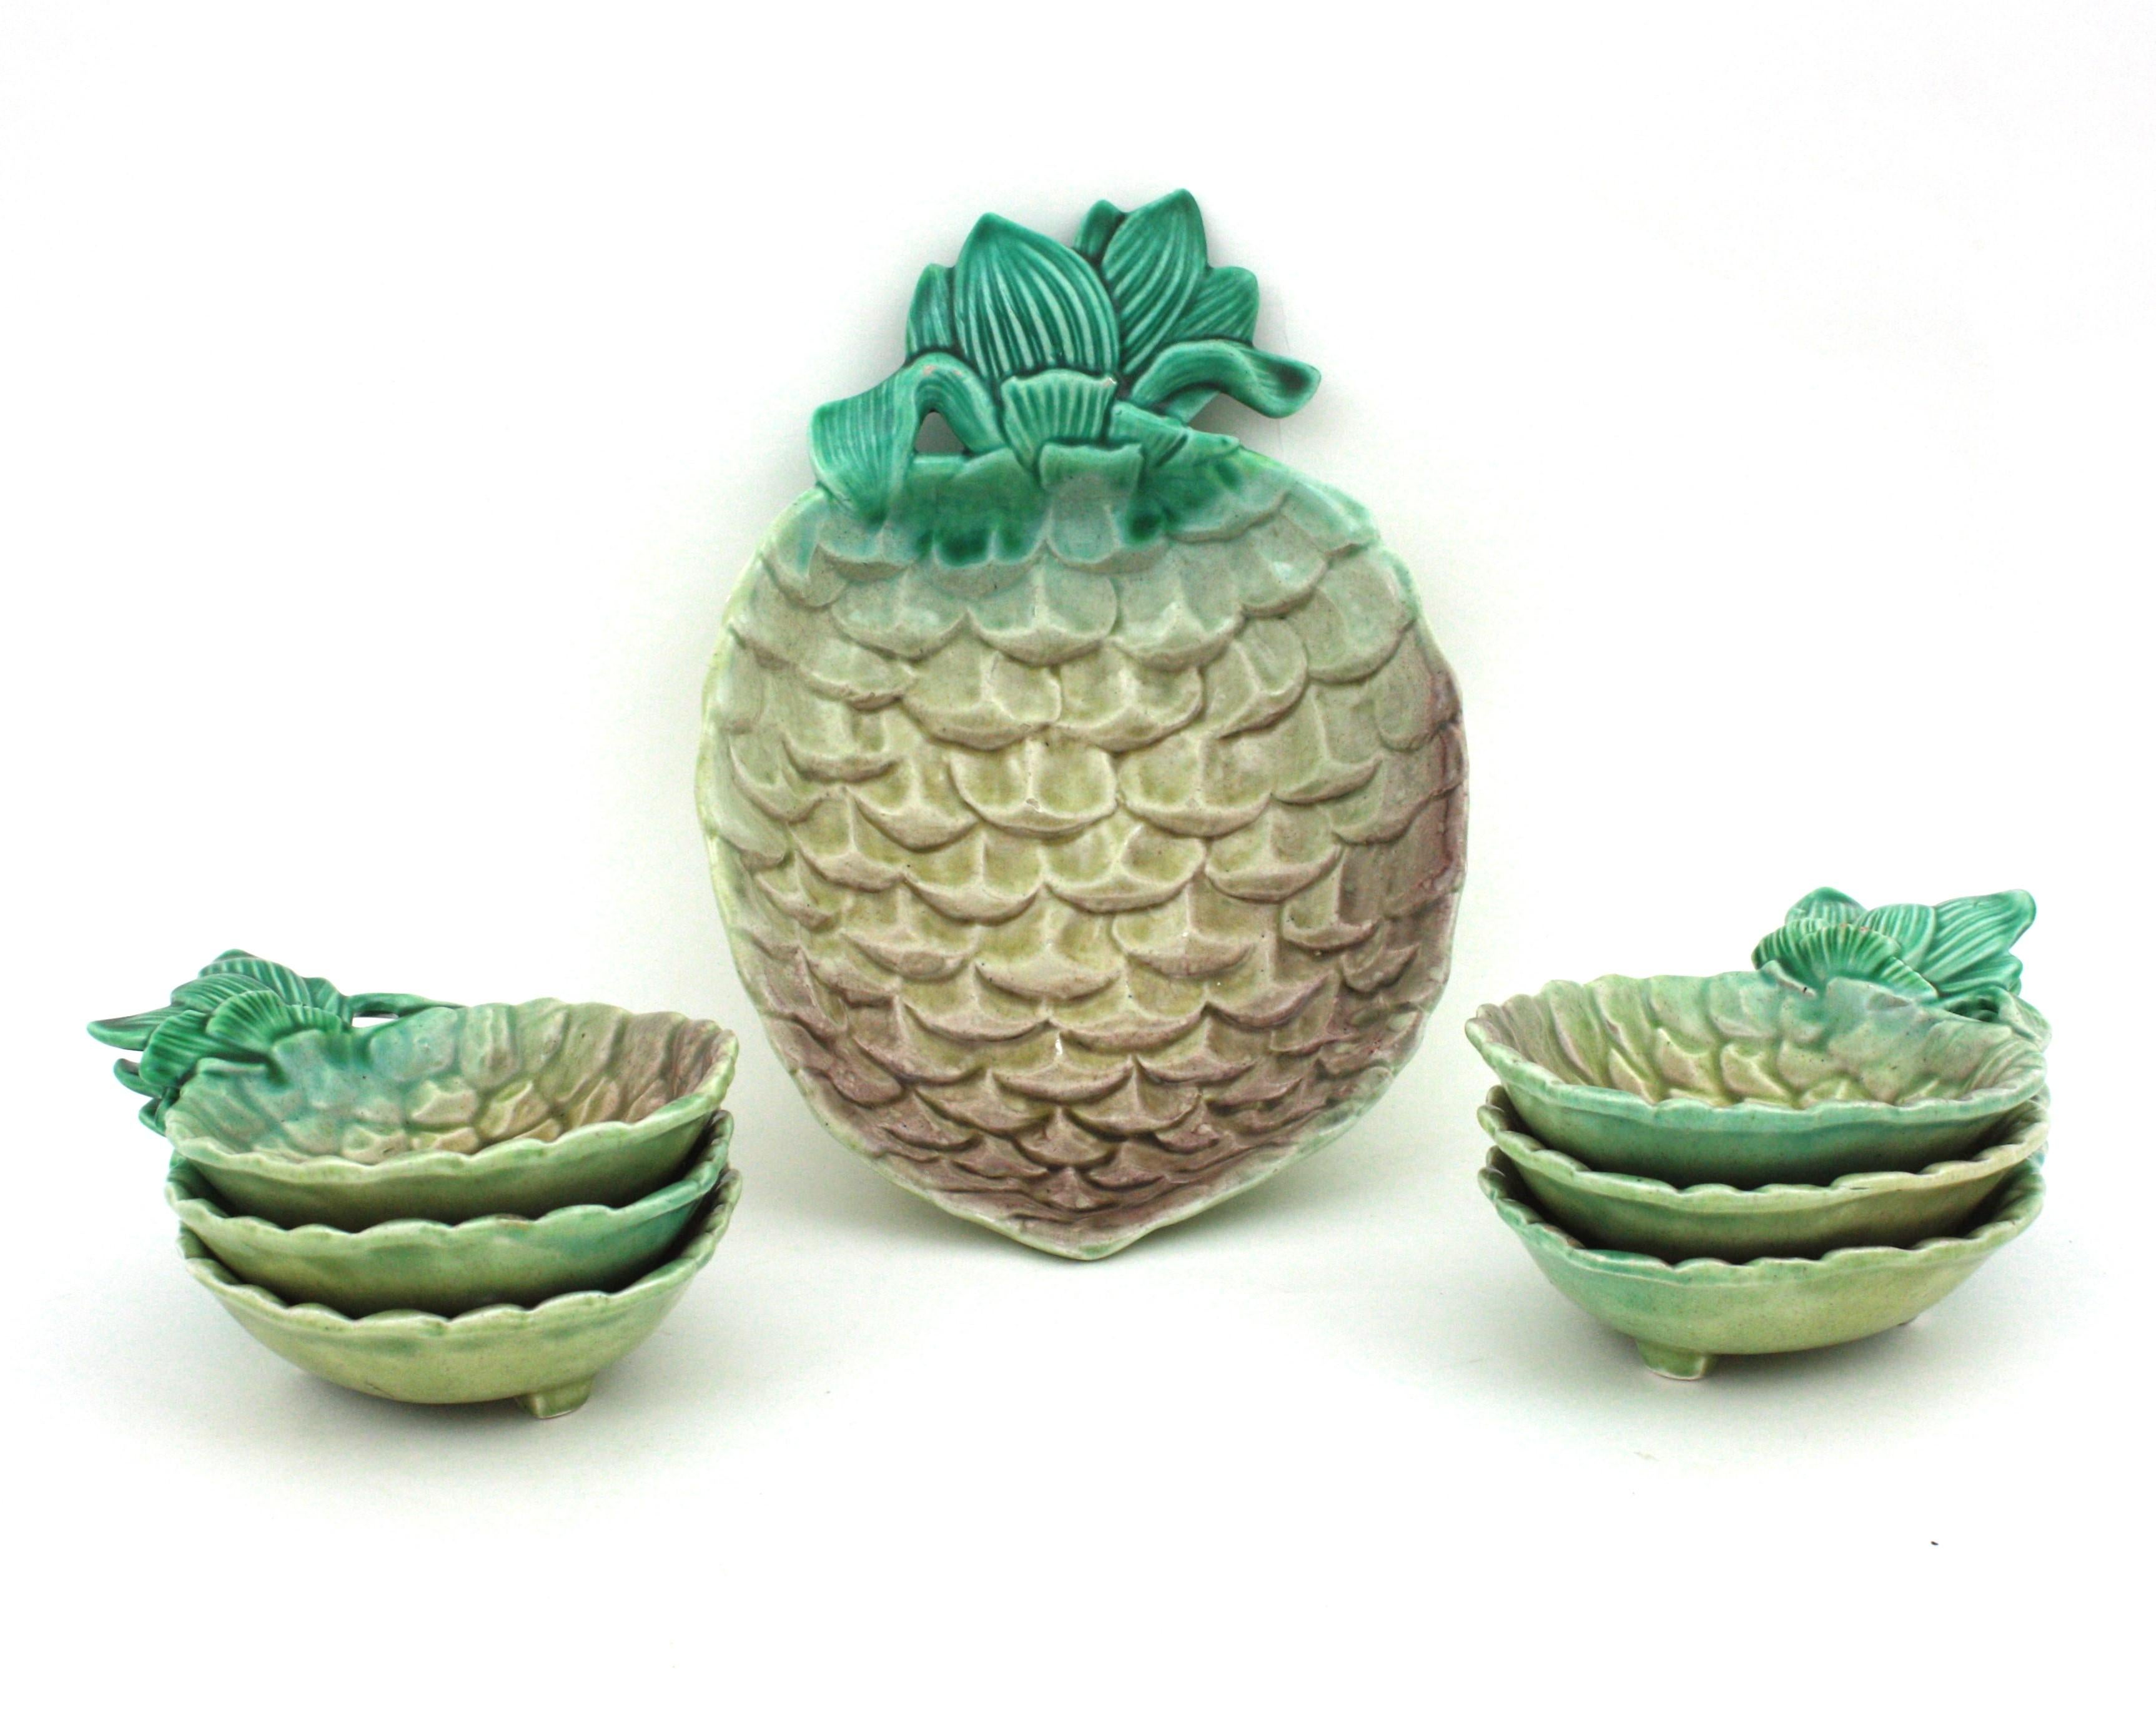 Eye-catching set of 6 majolica ceramic pineapple small dishes and a large pineapple tray or large bowl. Spain, 1960s.
This hand-painted set can be used to serve desserts, salads or appetizers and would be perfect for your parties and celebrations.